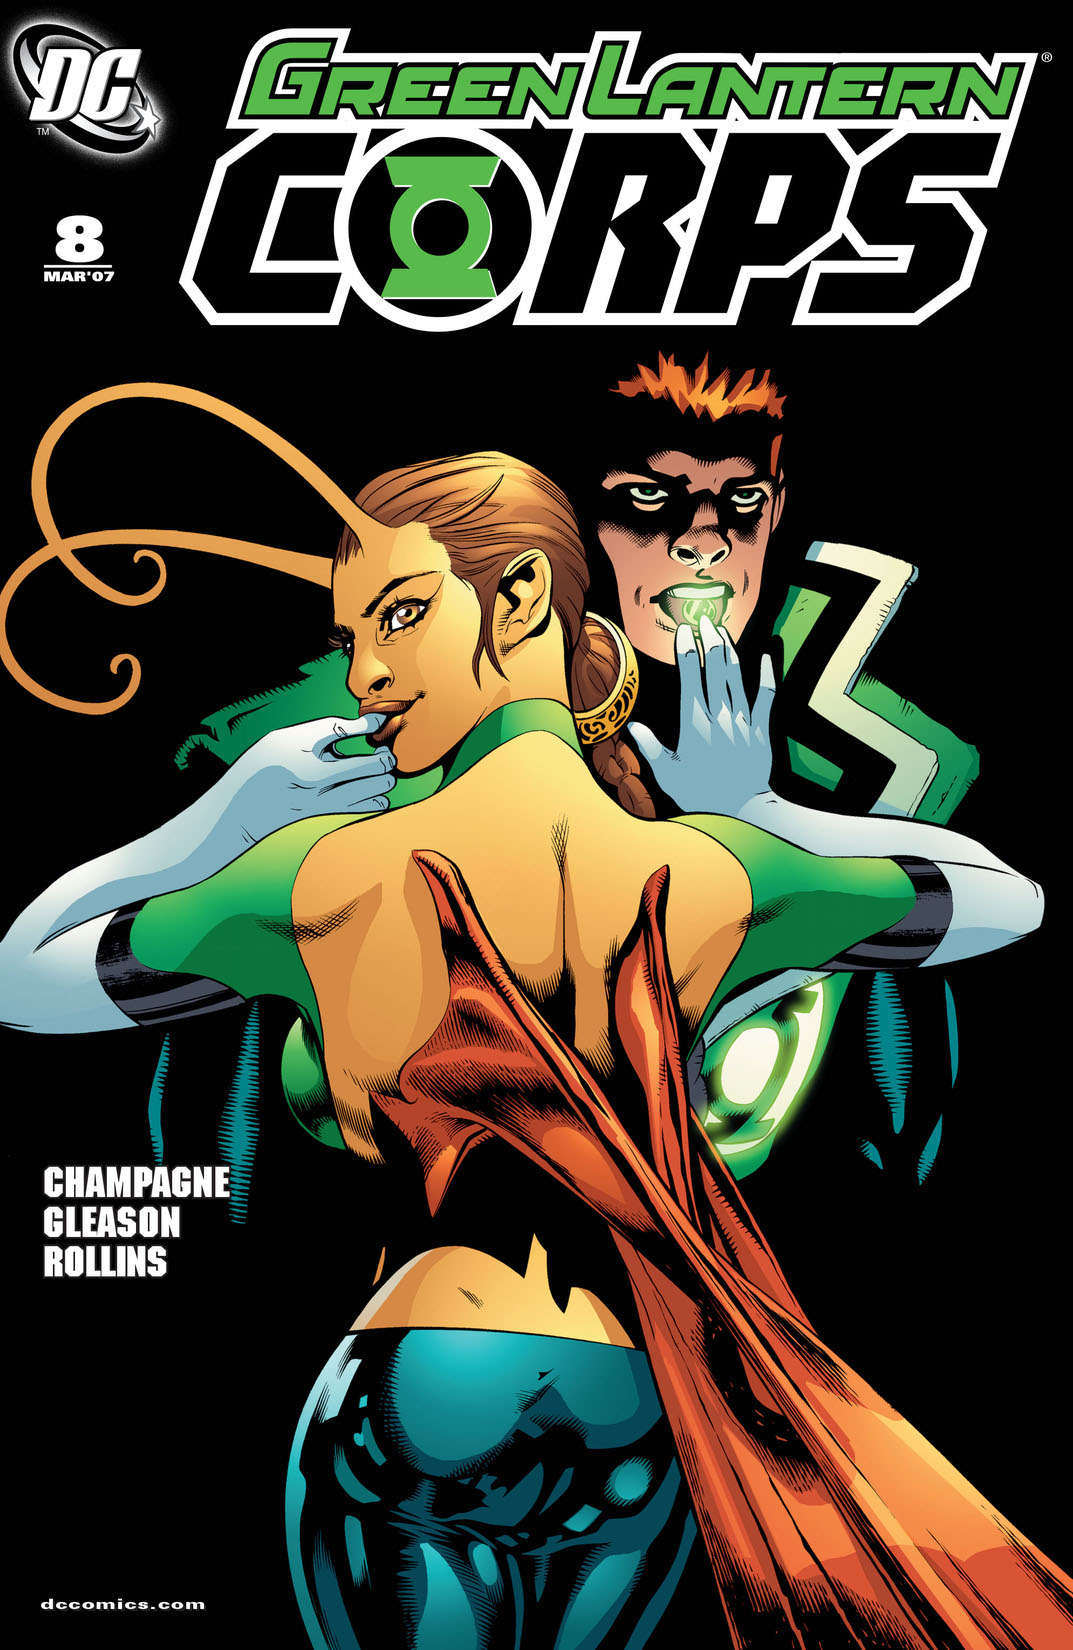 Green Lantern Corps (2006-) #8 preview images